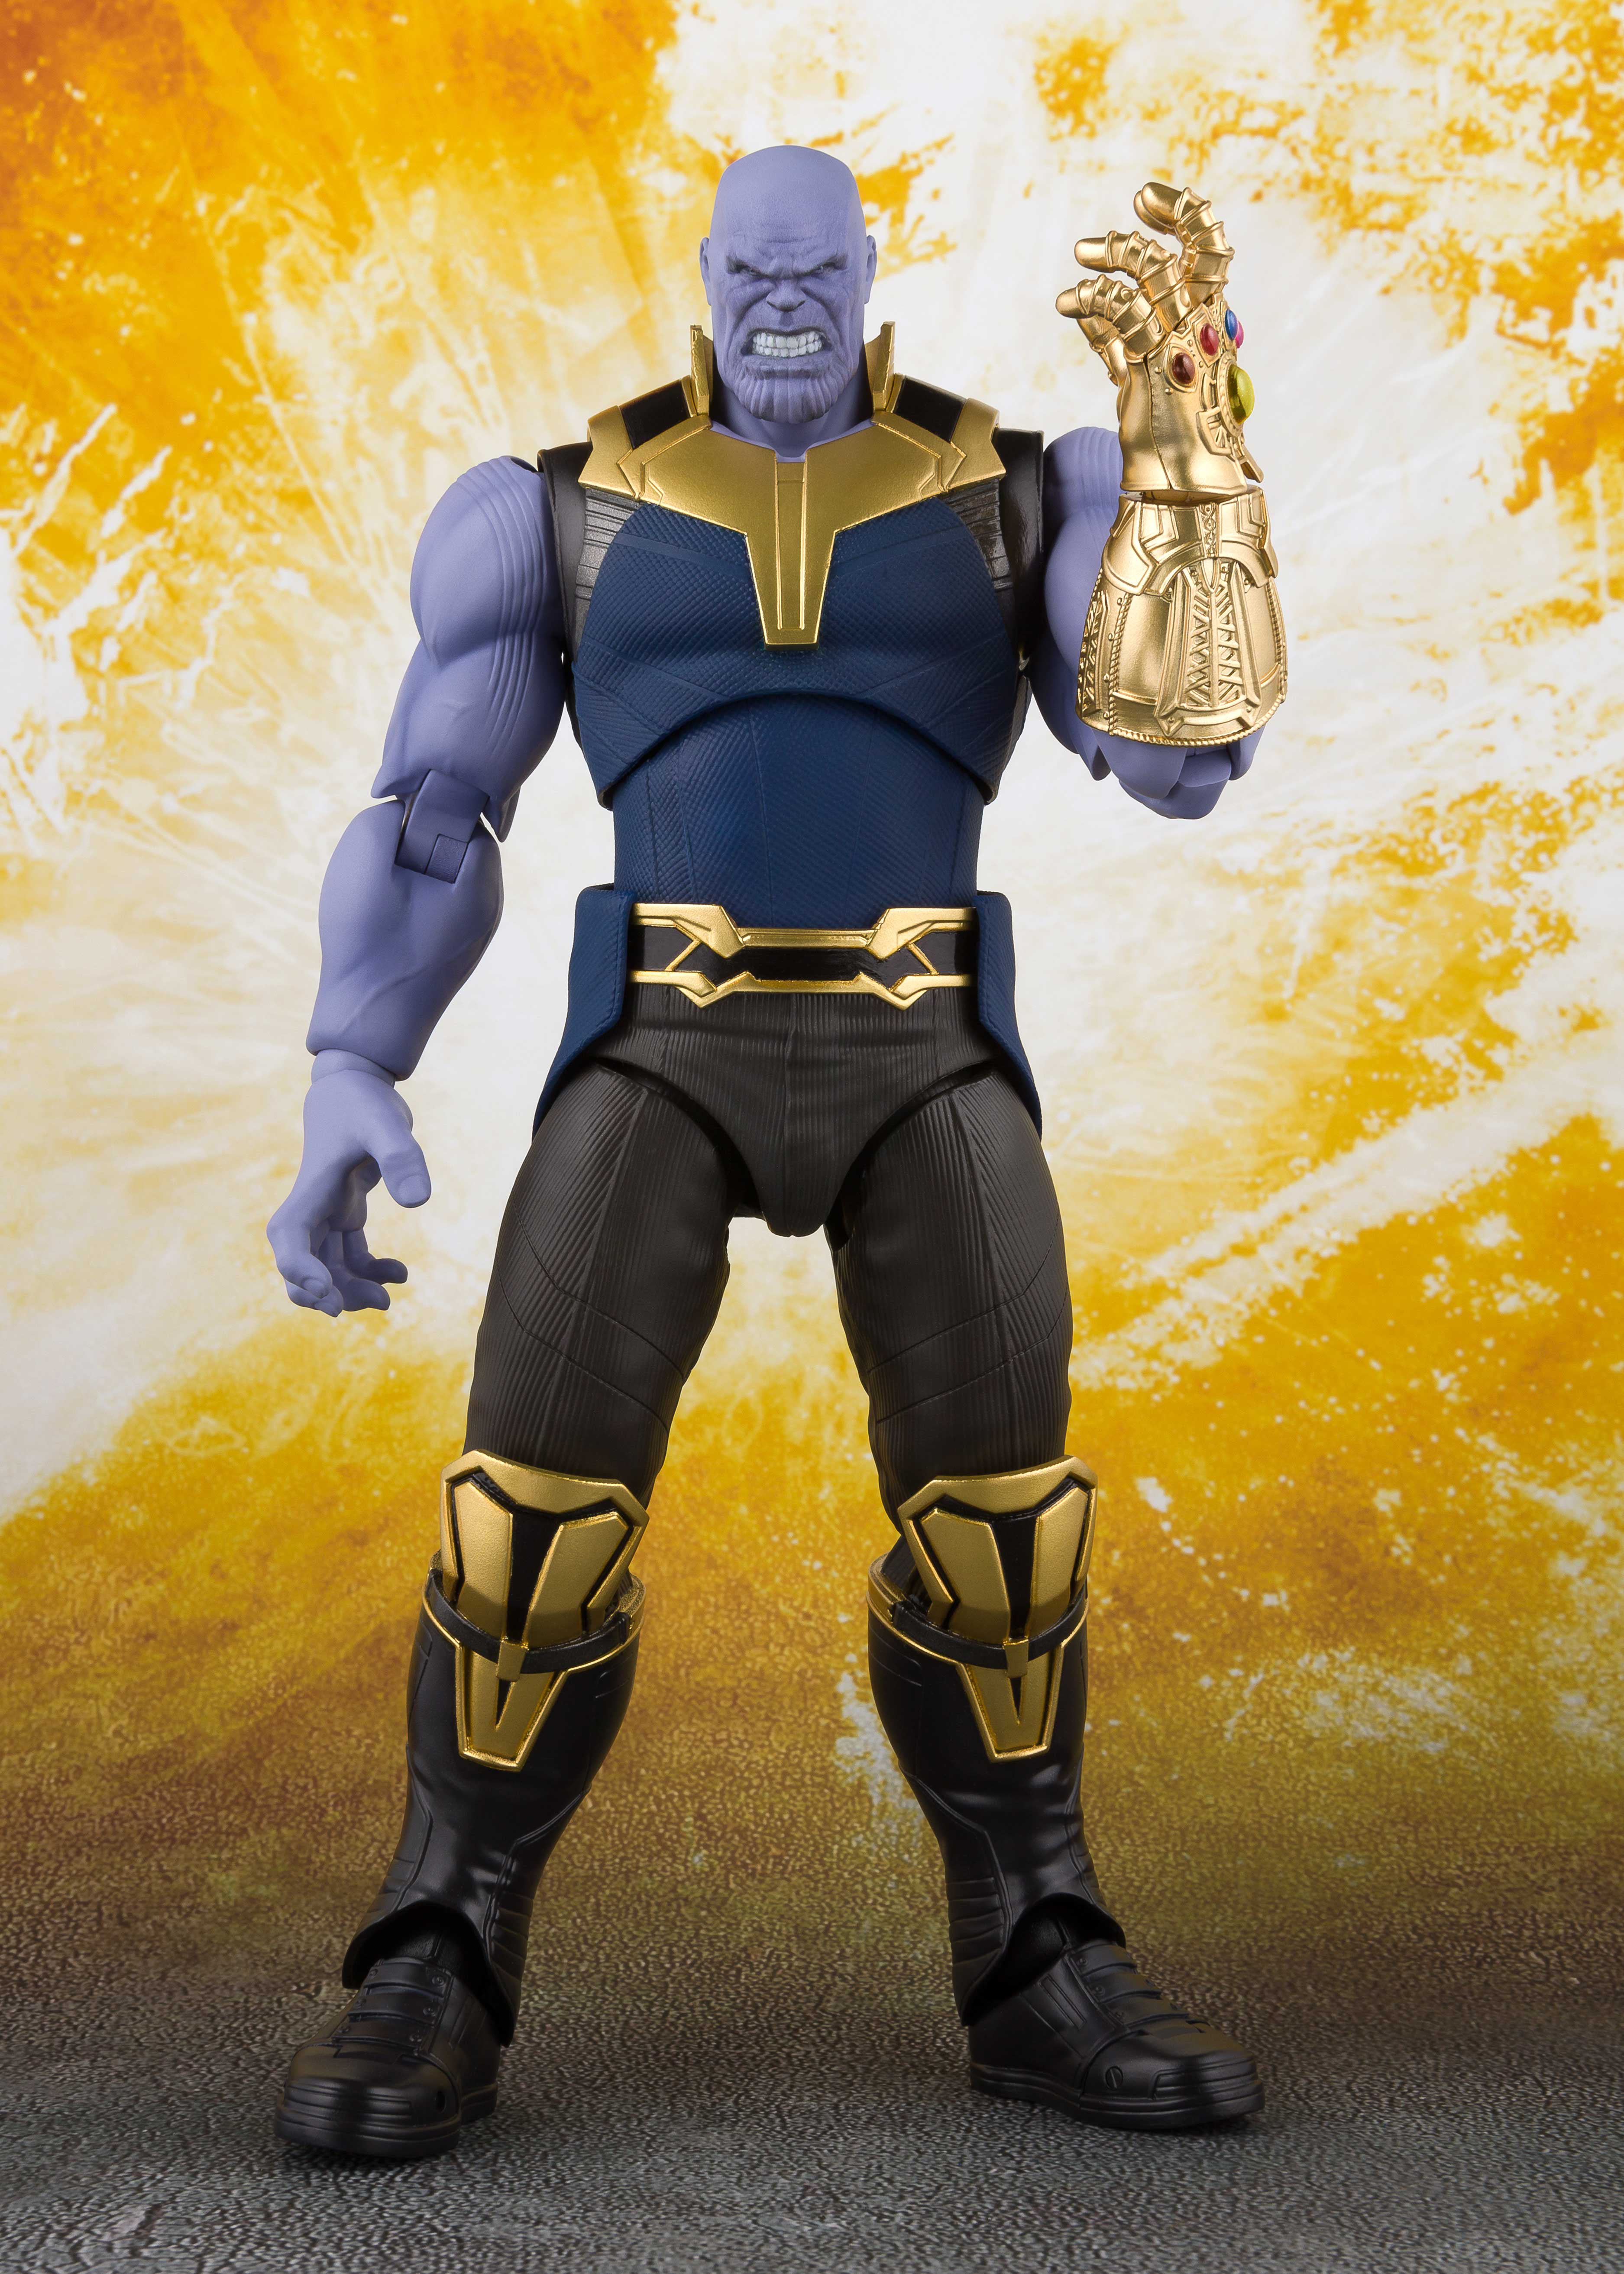 S.H.Figuarts Avengers Infinity War Thanos Spider-Man Captain America Figure Toy 